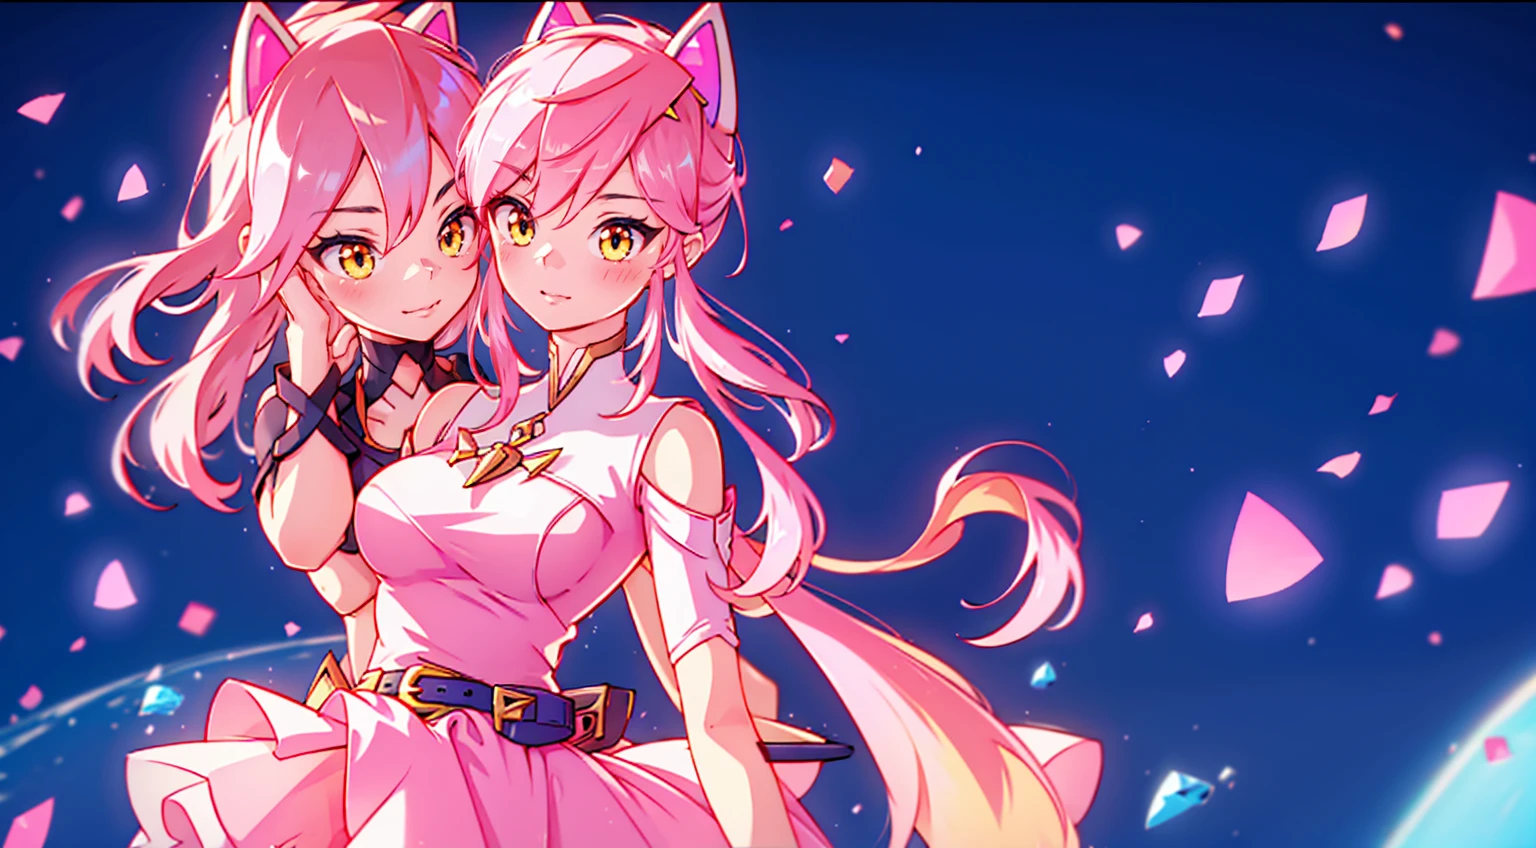 An anime girl with cat ears. Fake cat ears, and the cat ears are framed in gold on the head, long pink hair, very long hair, bright pink hair, white miniskirt with gold belt, She wears white gloves on her hands, pinker BH pinker Tanger, around the neck a golden collar, View to the viewer, 
sexly, large , tight juicy ass, elongated yellow eyes with pink fragments, cute face",,